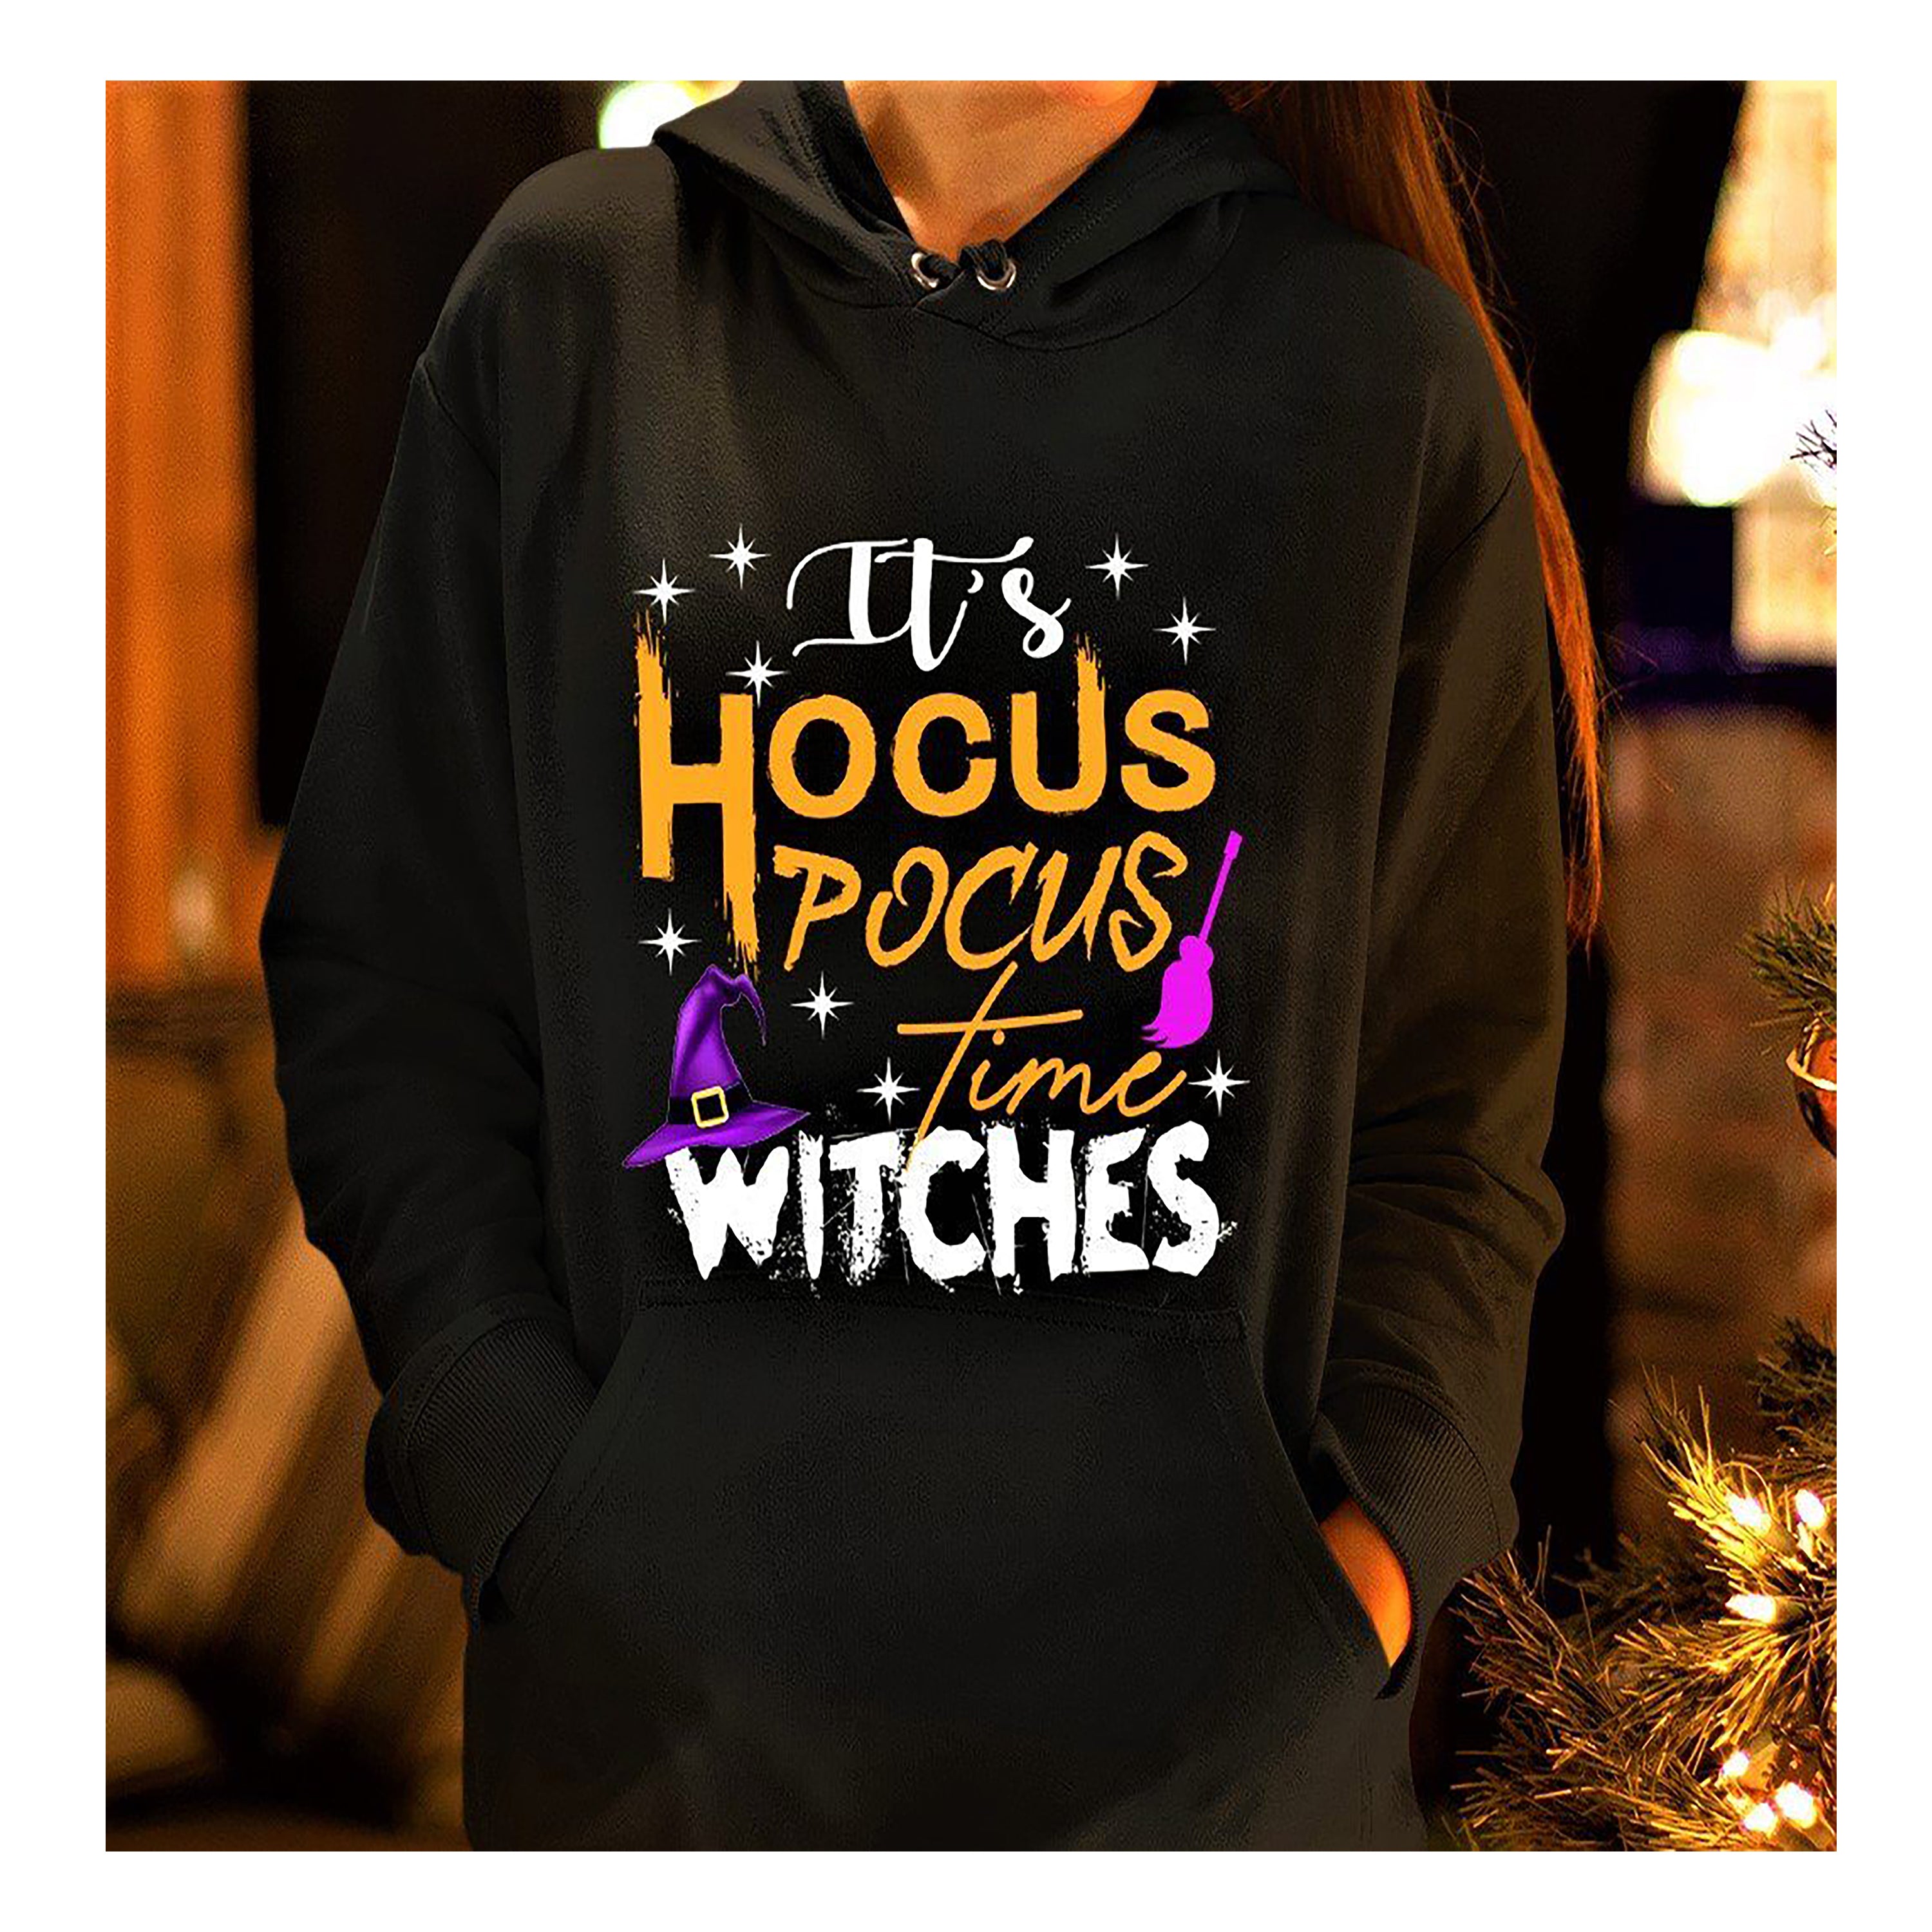 'IT'S TIME WITCHES"